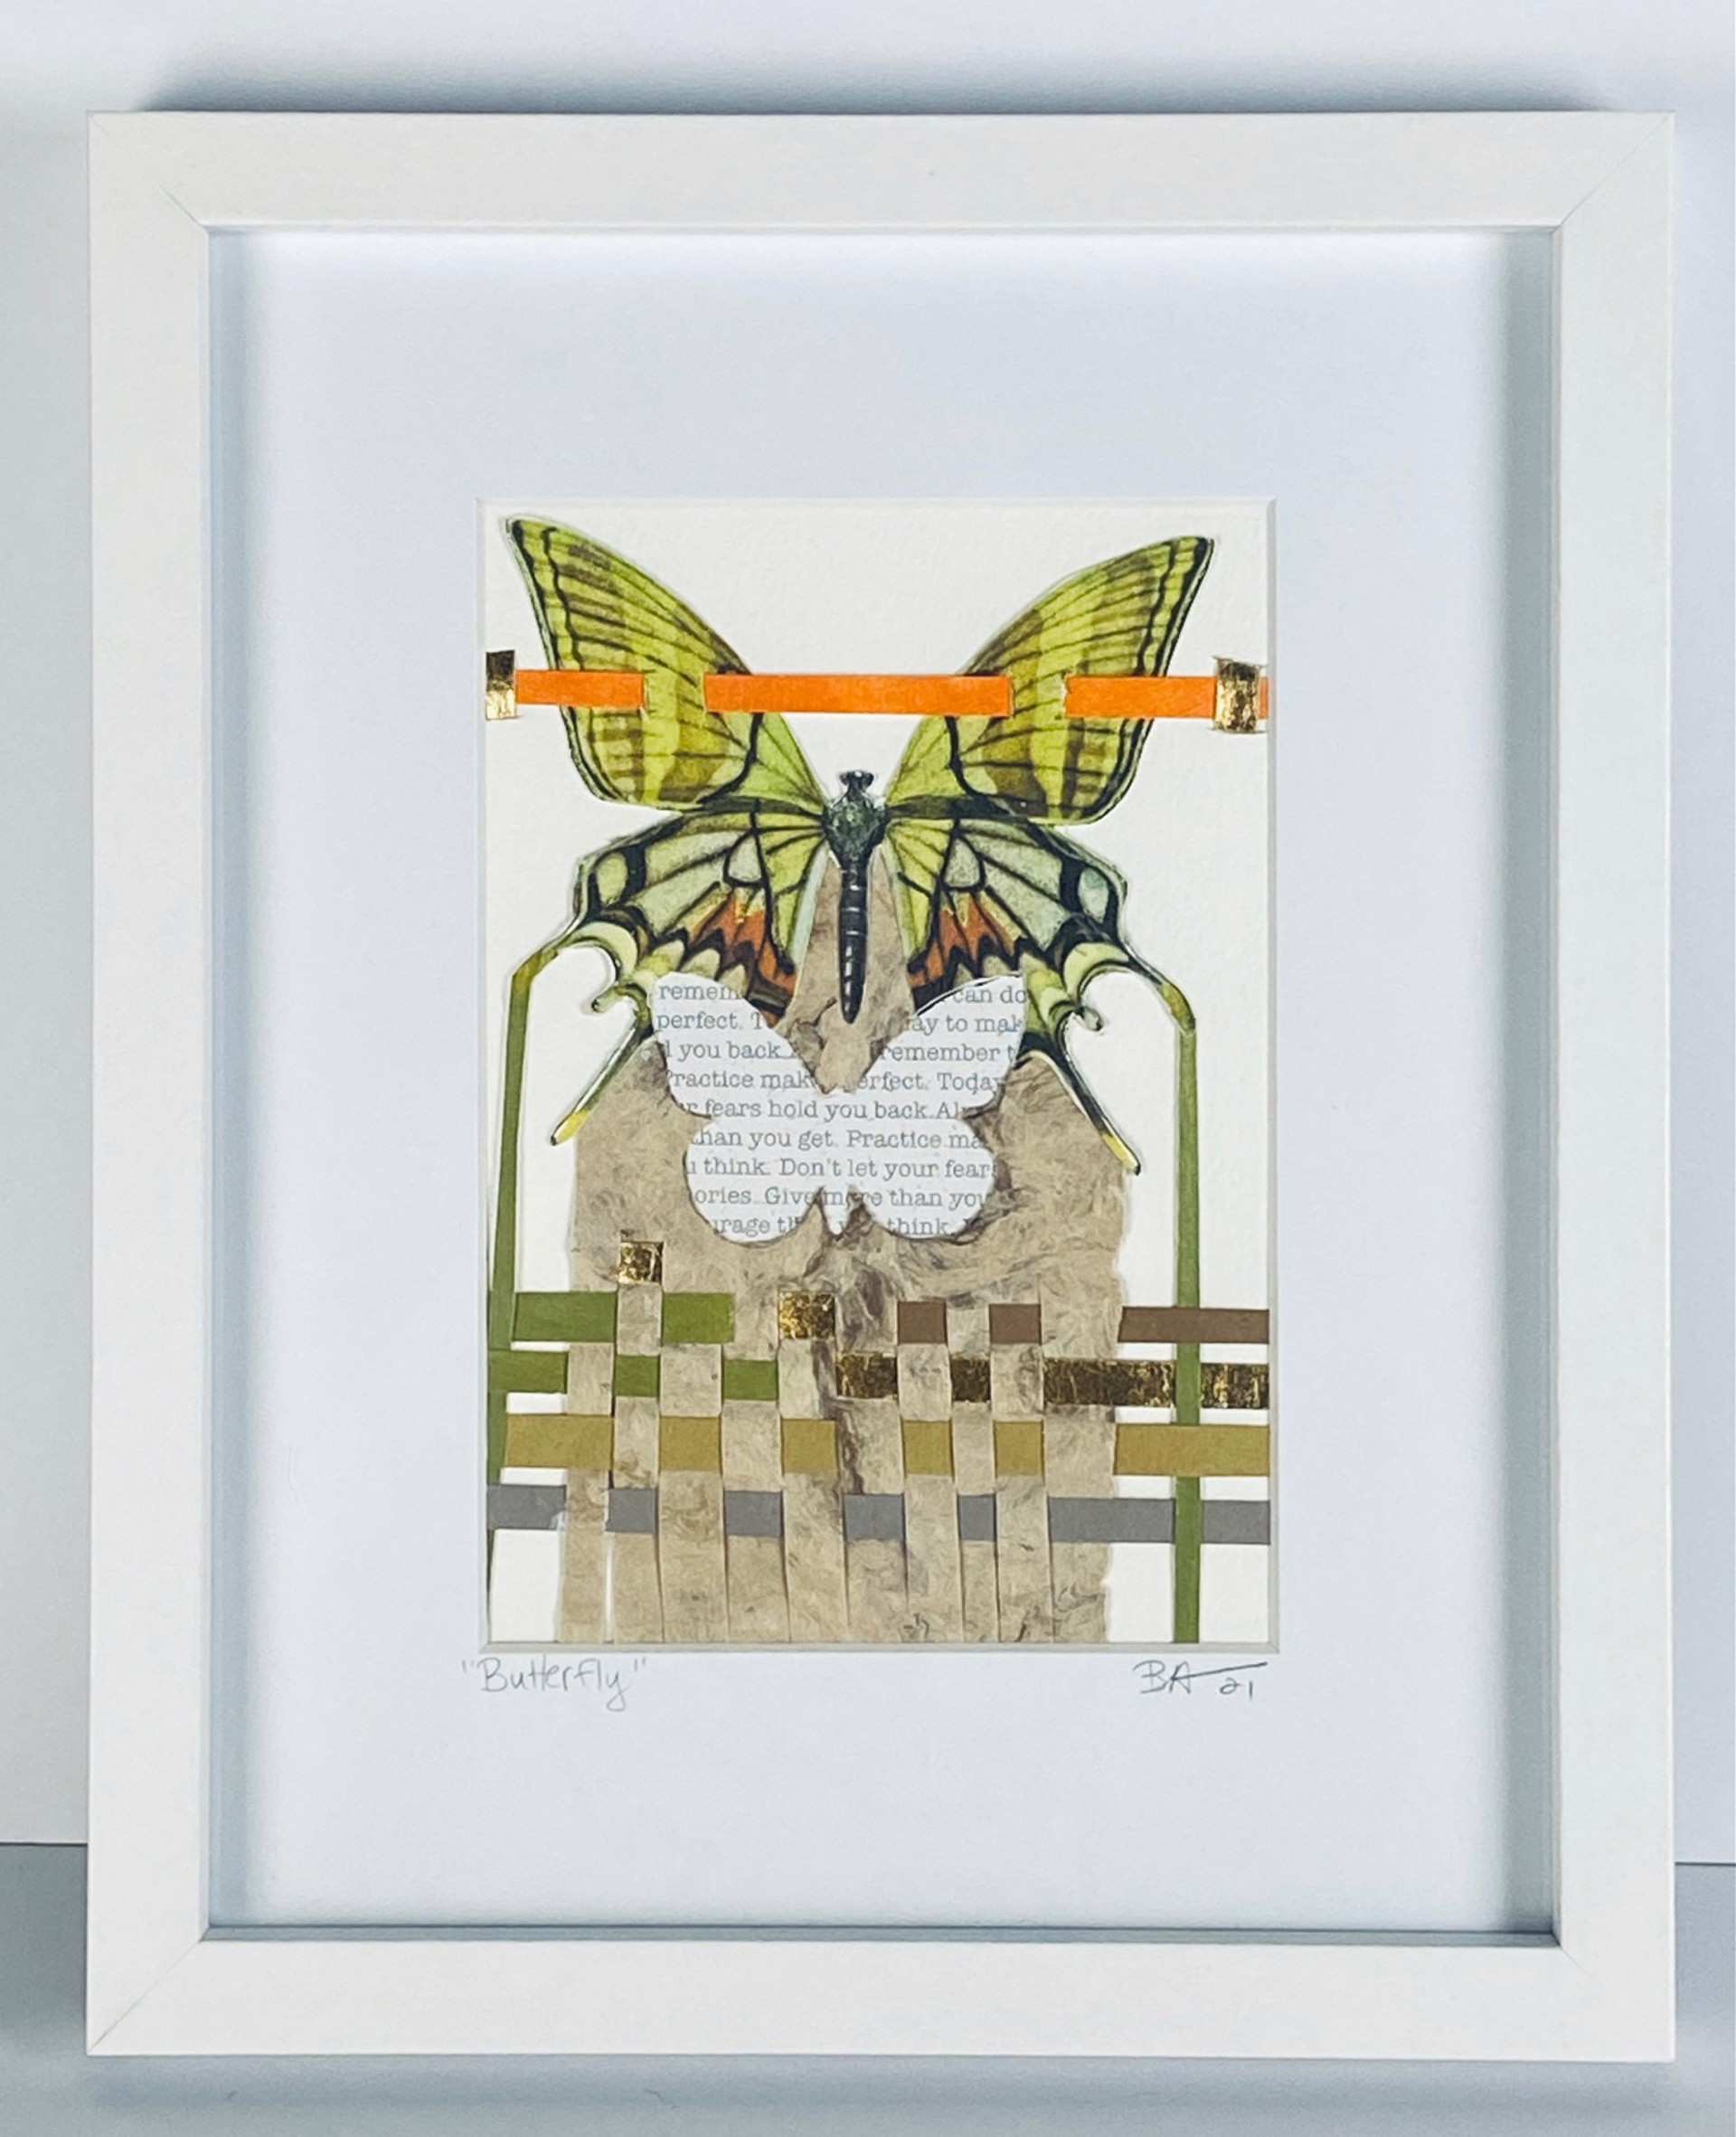 Collage Butterfly by Beth Aronoff